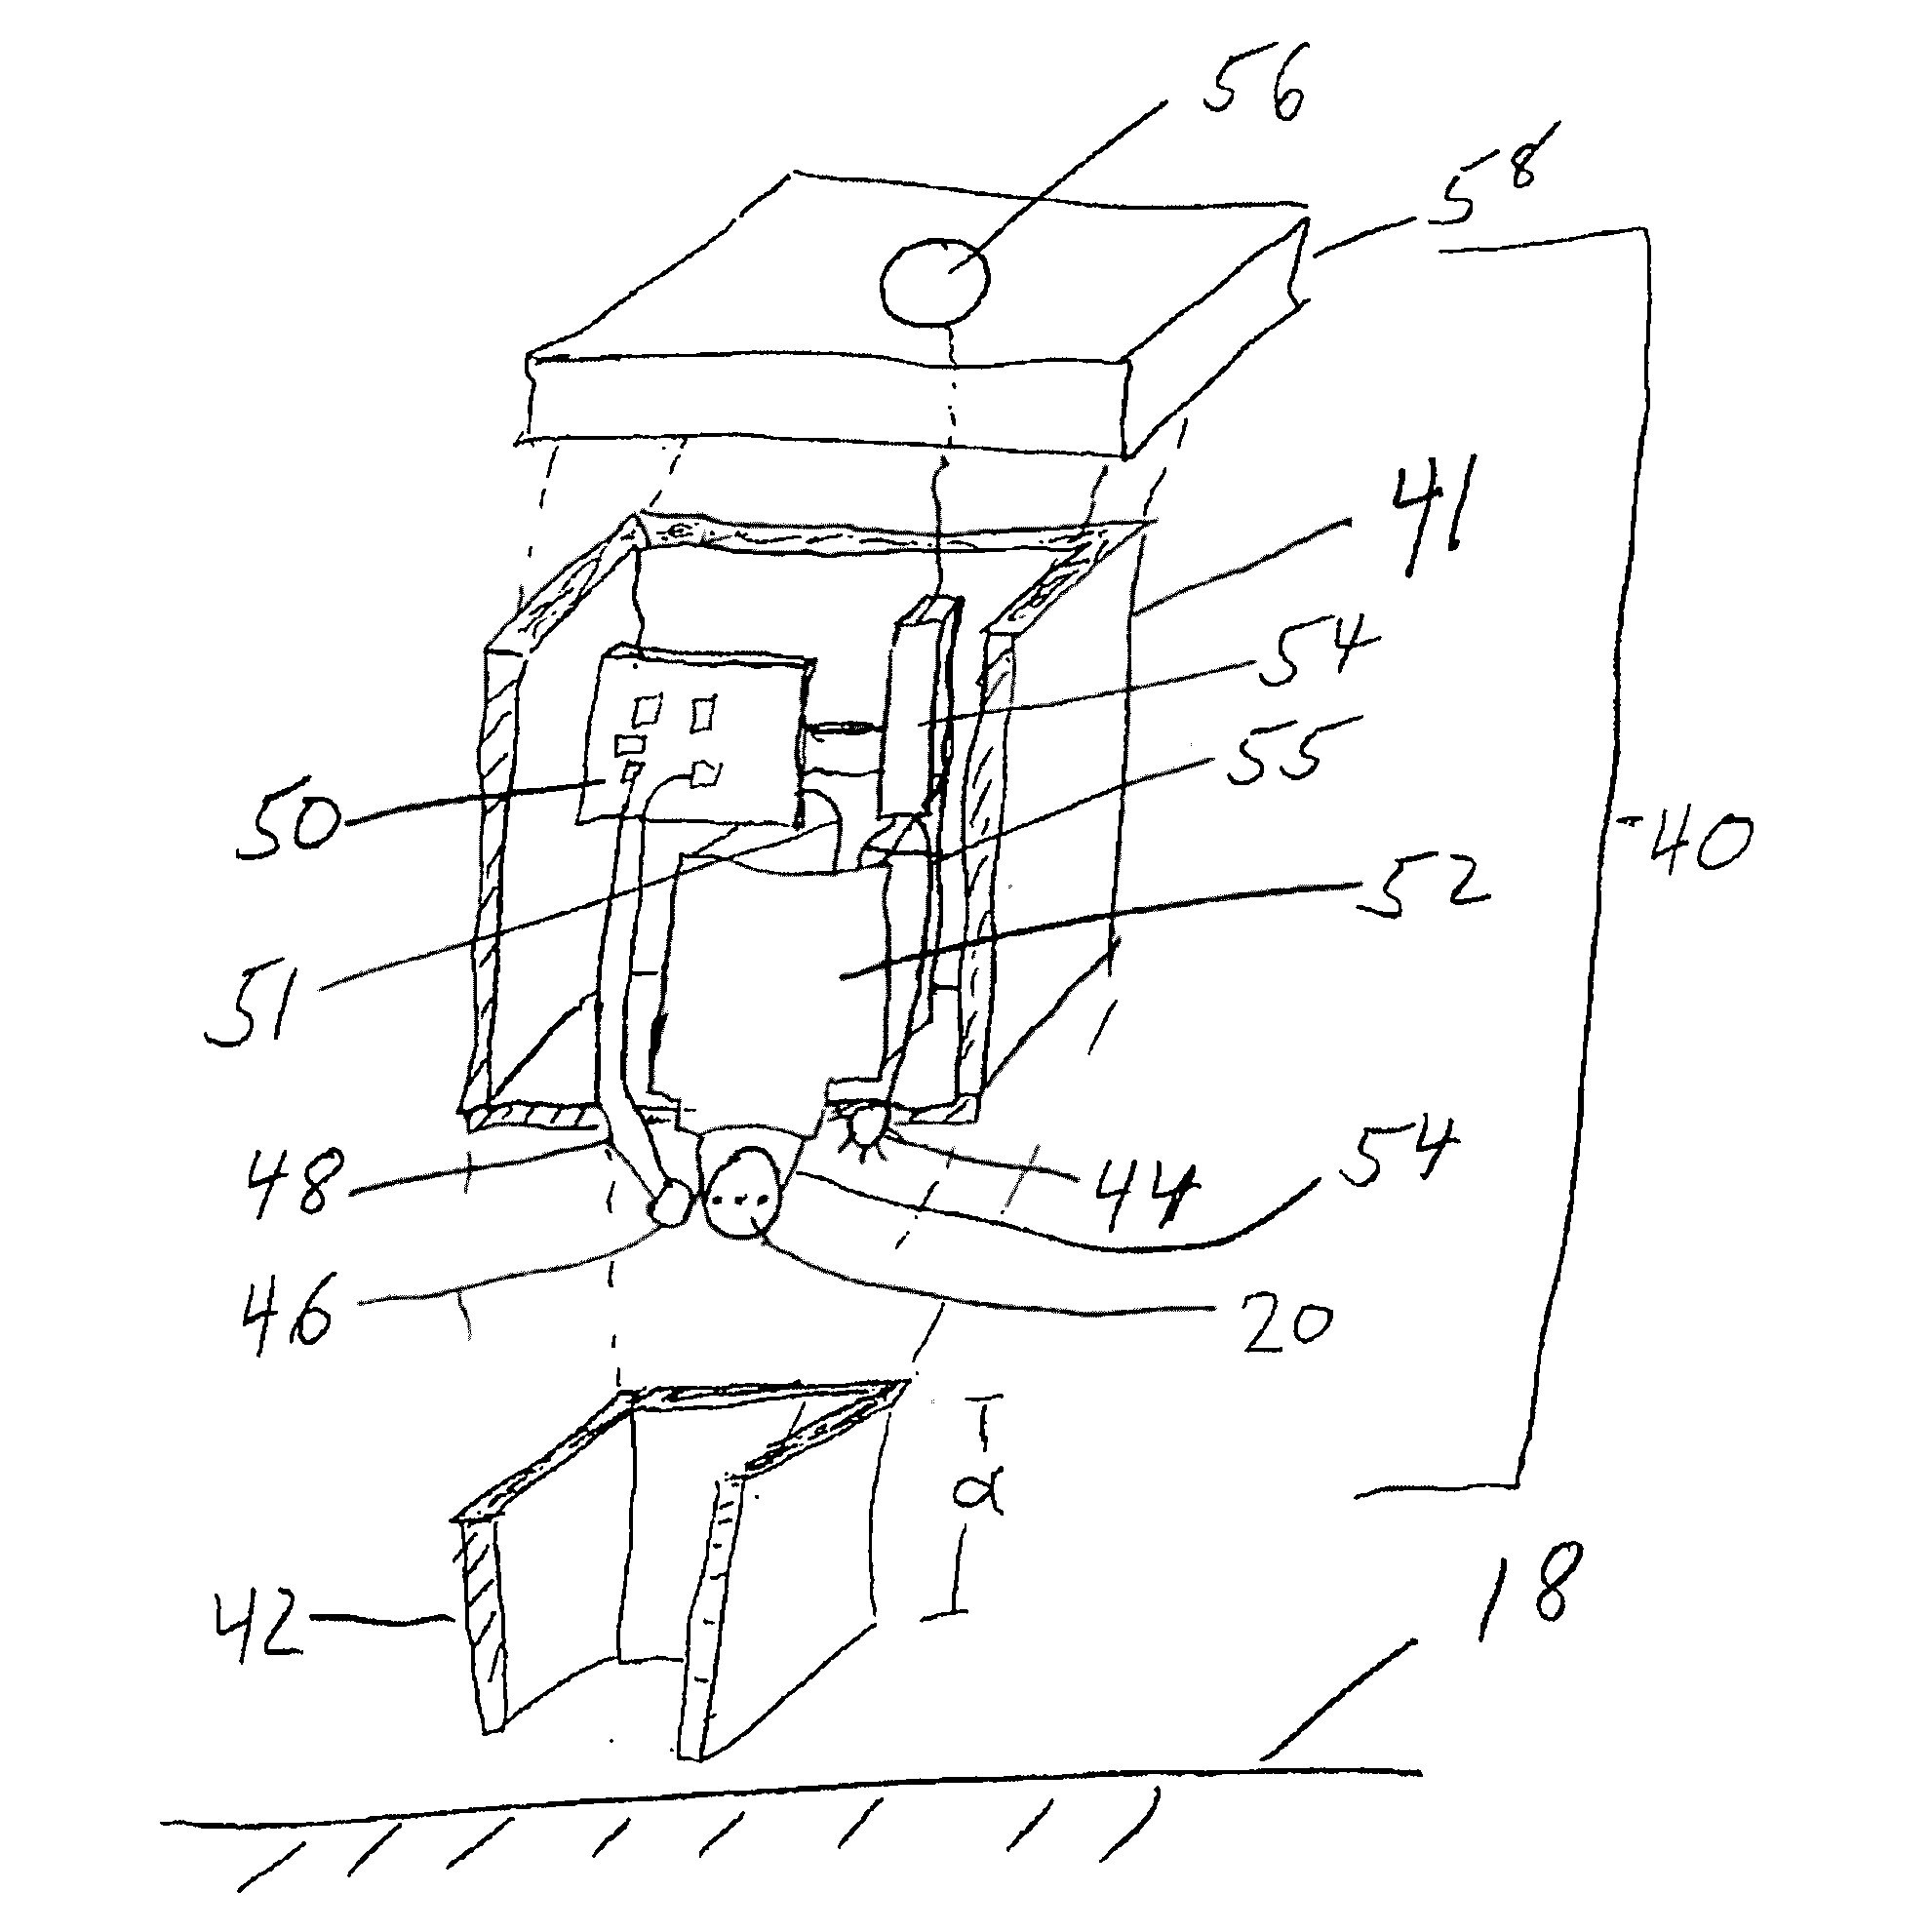 Apparatus and methods for modifying keratinous surfaces